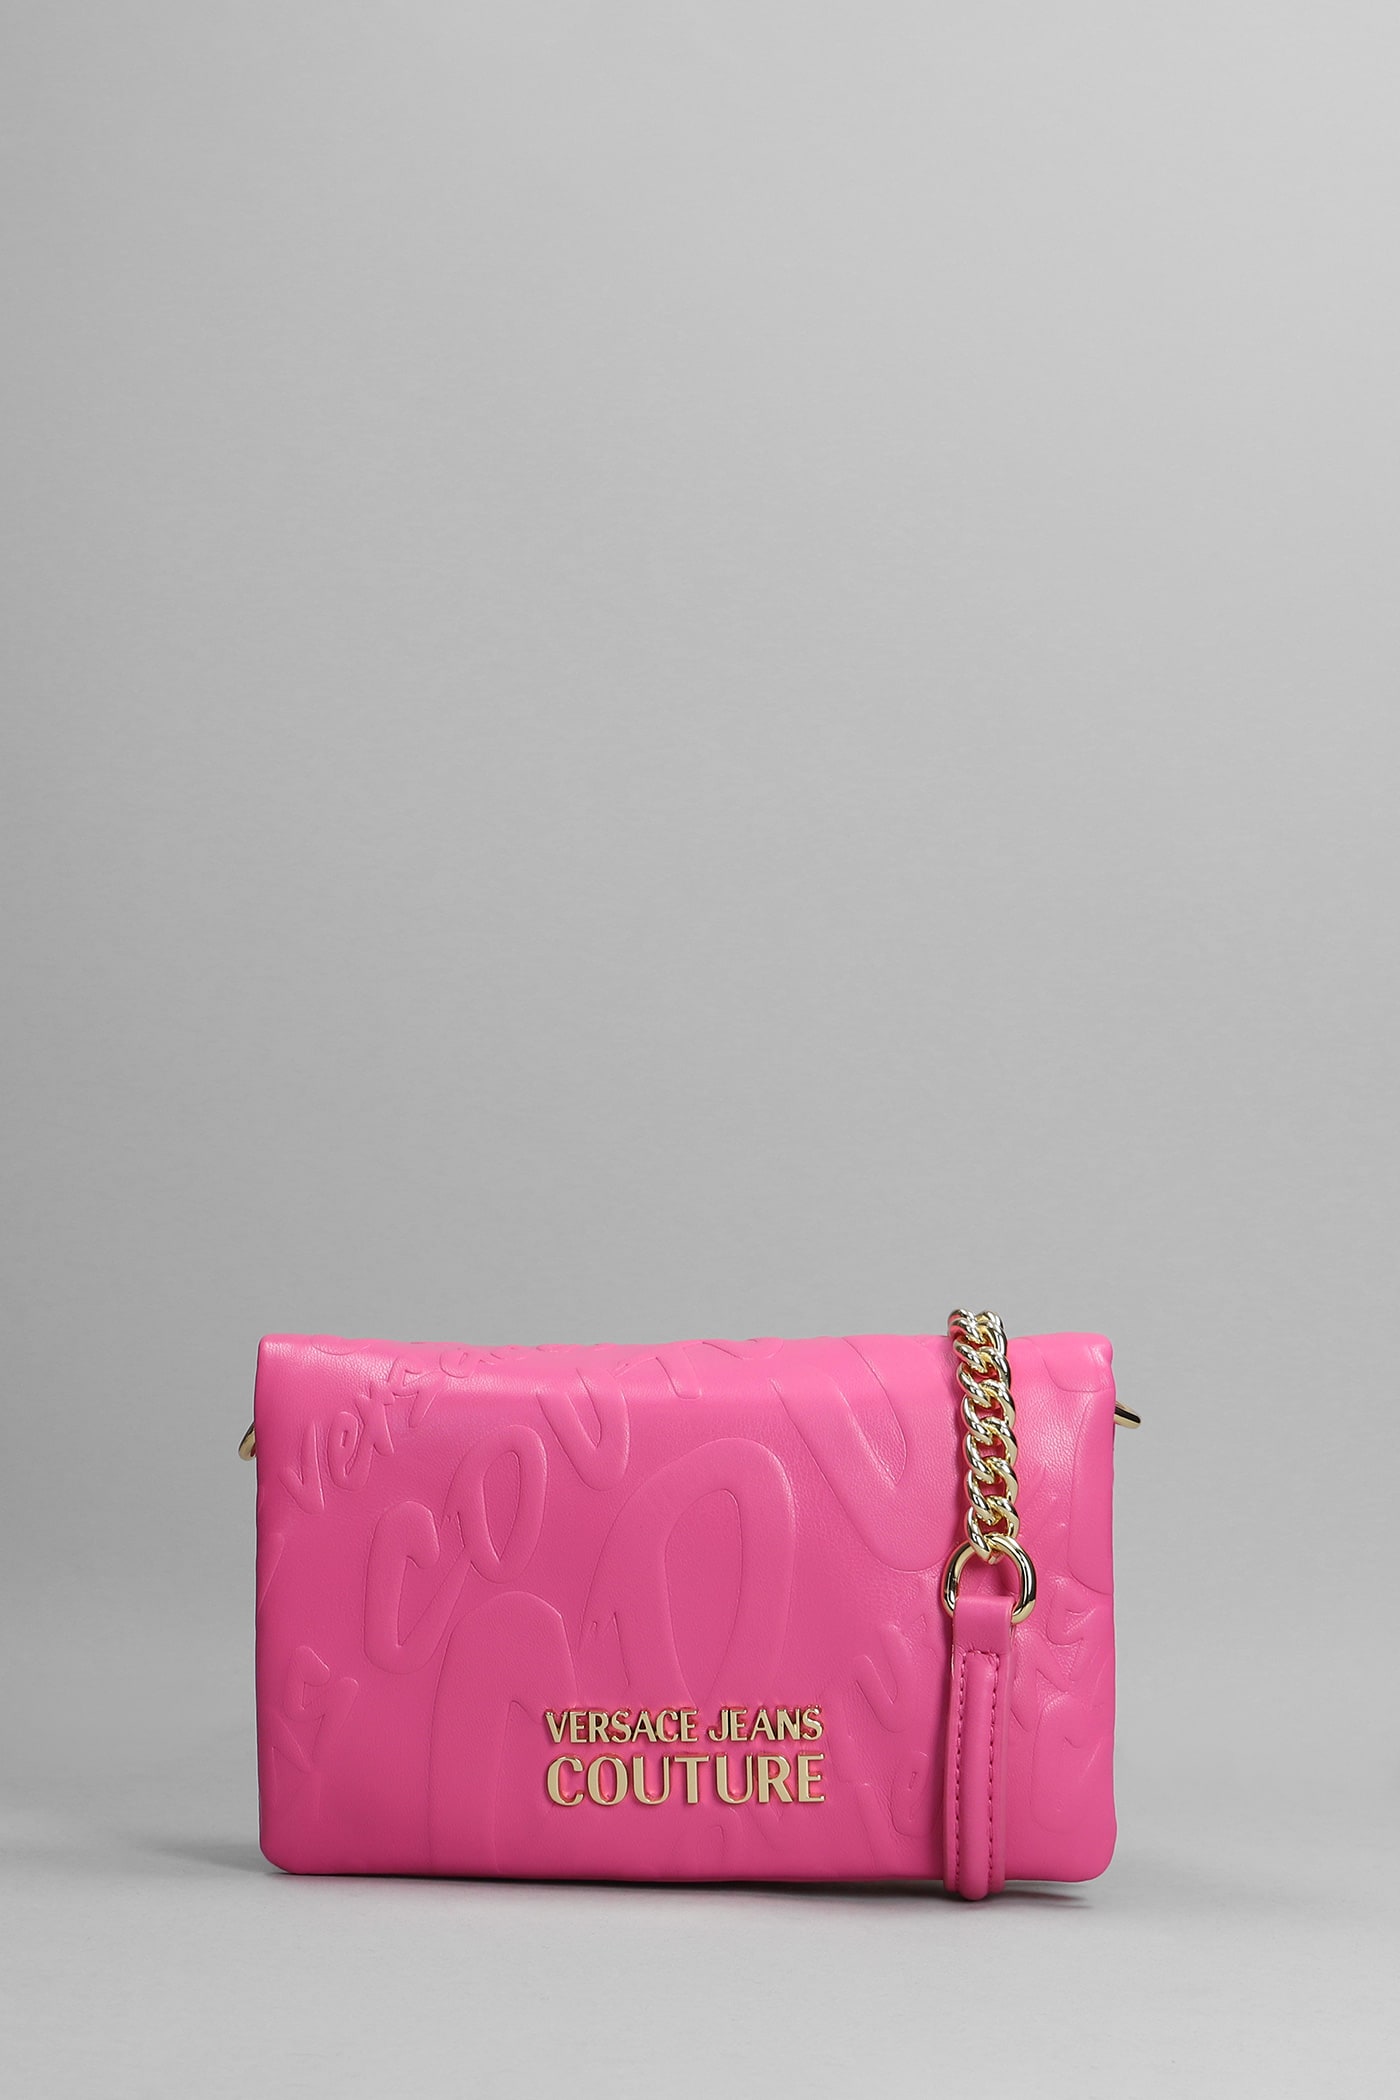 Versace Jeans Couture Shoulder Bag In Fuxia Faux Leather